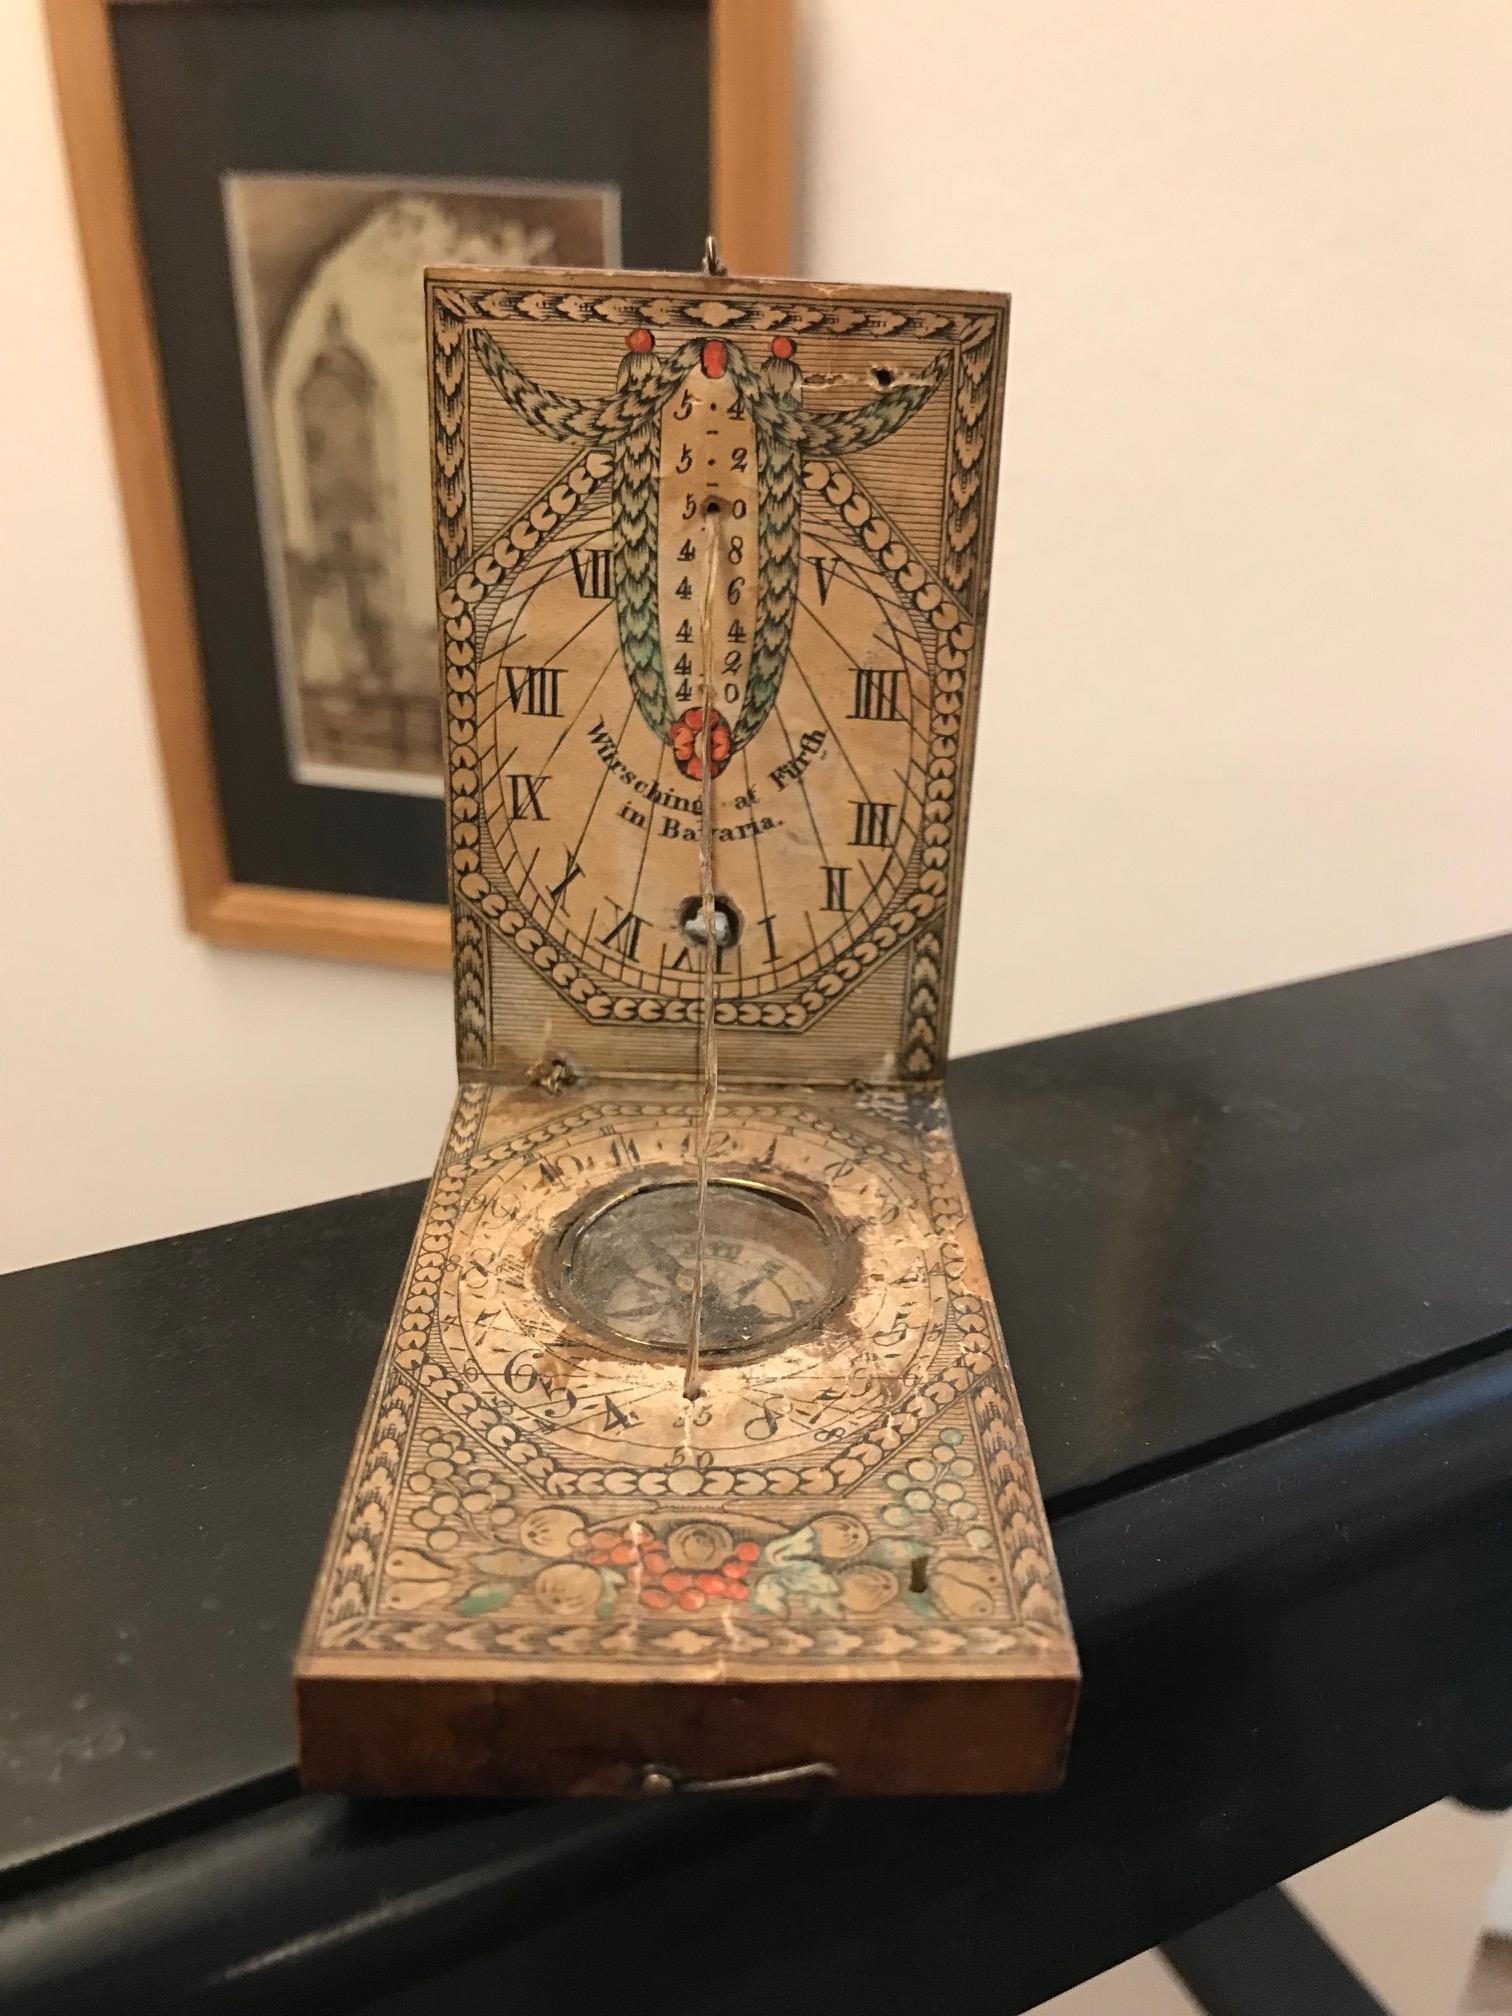 Portable sundial with functioning compass.
Some wear due to usage. With build in compass. Producer Würsching (second quarter 19th century) Origin Fürth in Bavaria. Dimensions: open: 11.3 × 7 × 11 cm (4 7/16 × 2 3/4 × 4 5/16 in. Materials: wood,